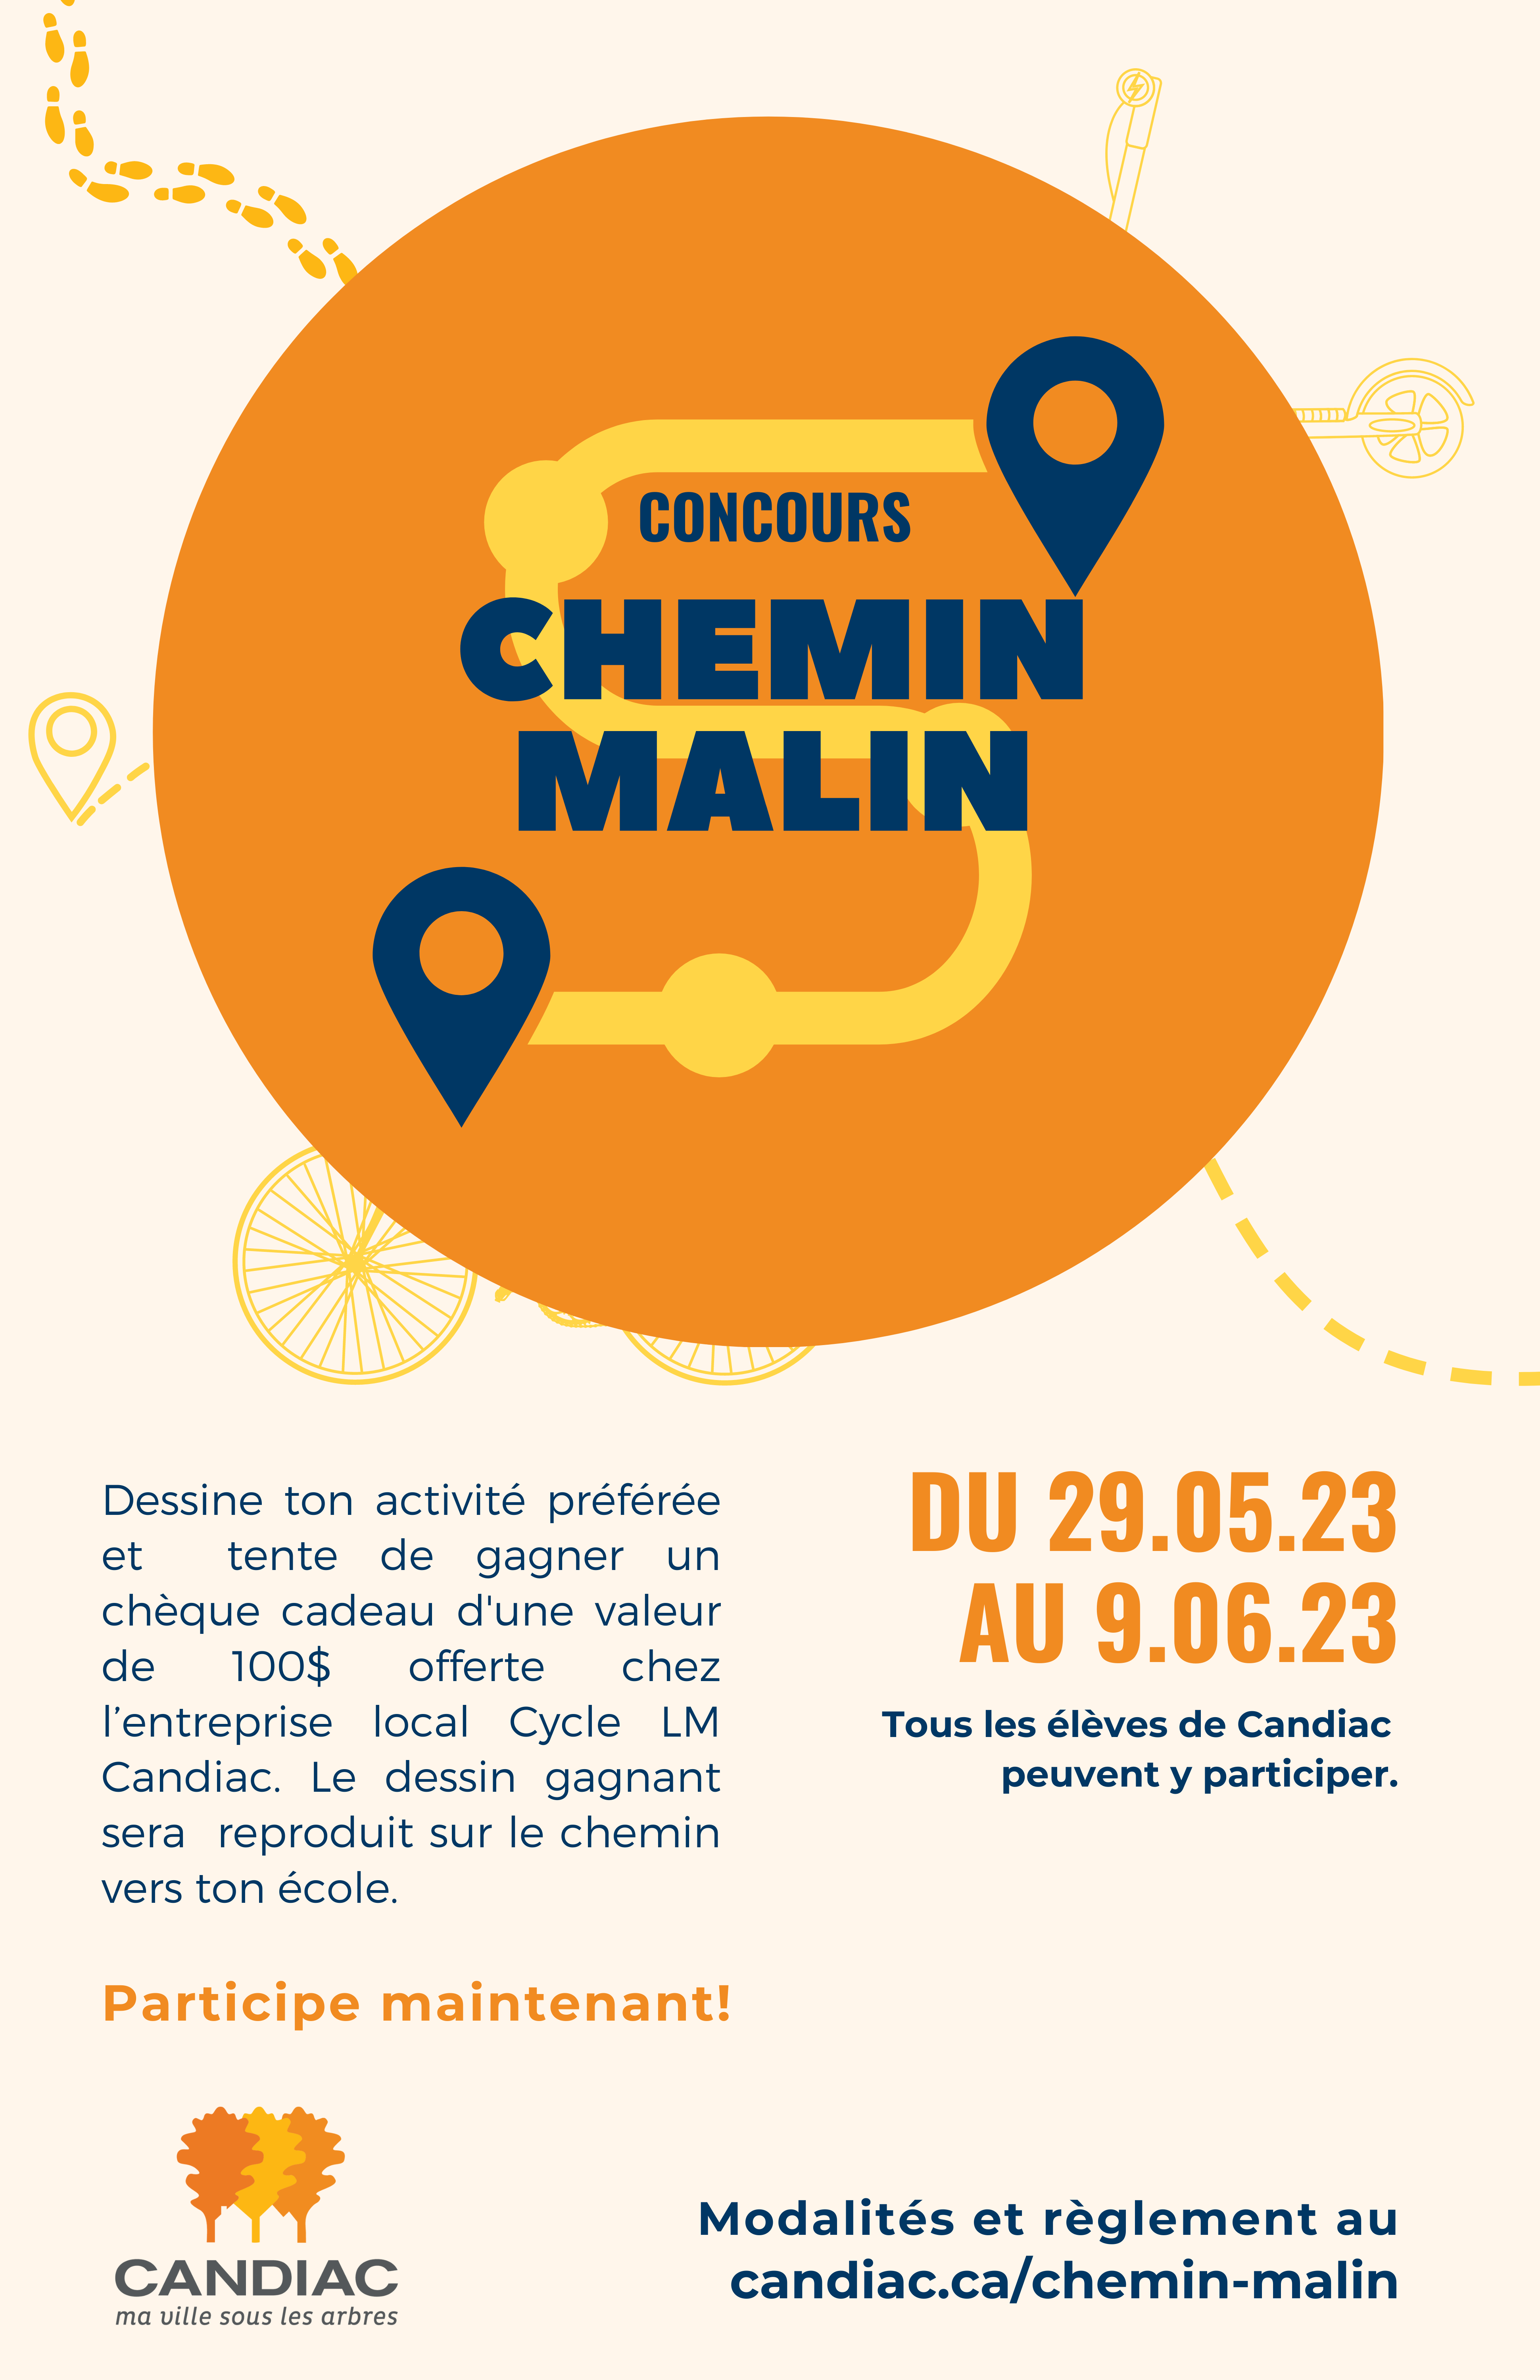 Concours_chemin_malin_(1).png (949 KB)